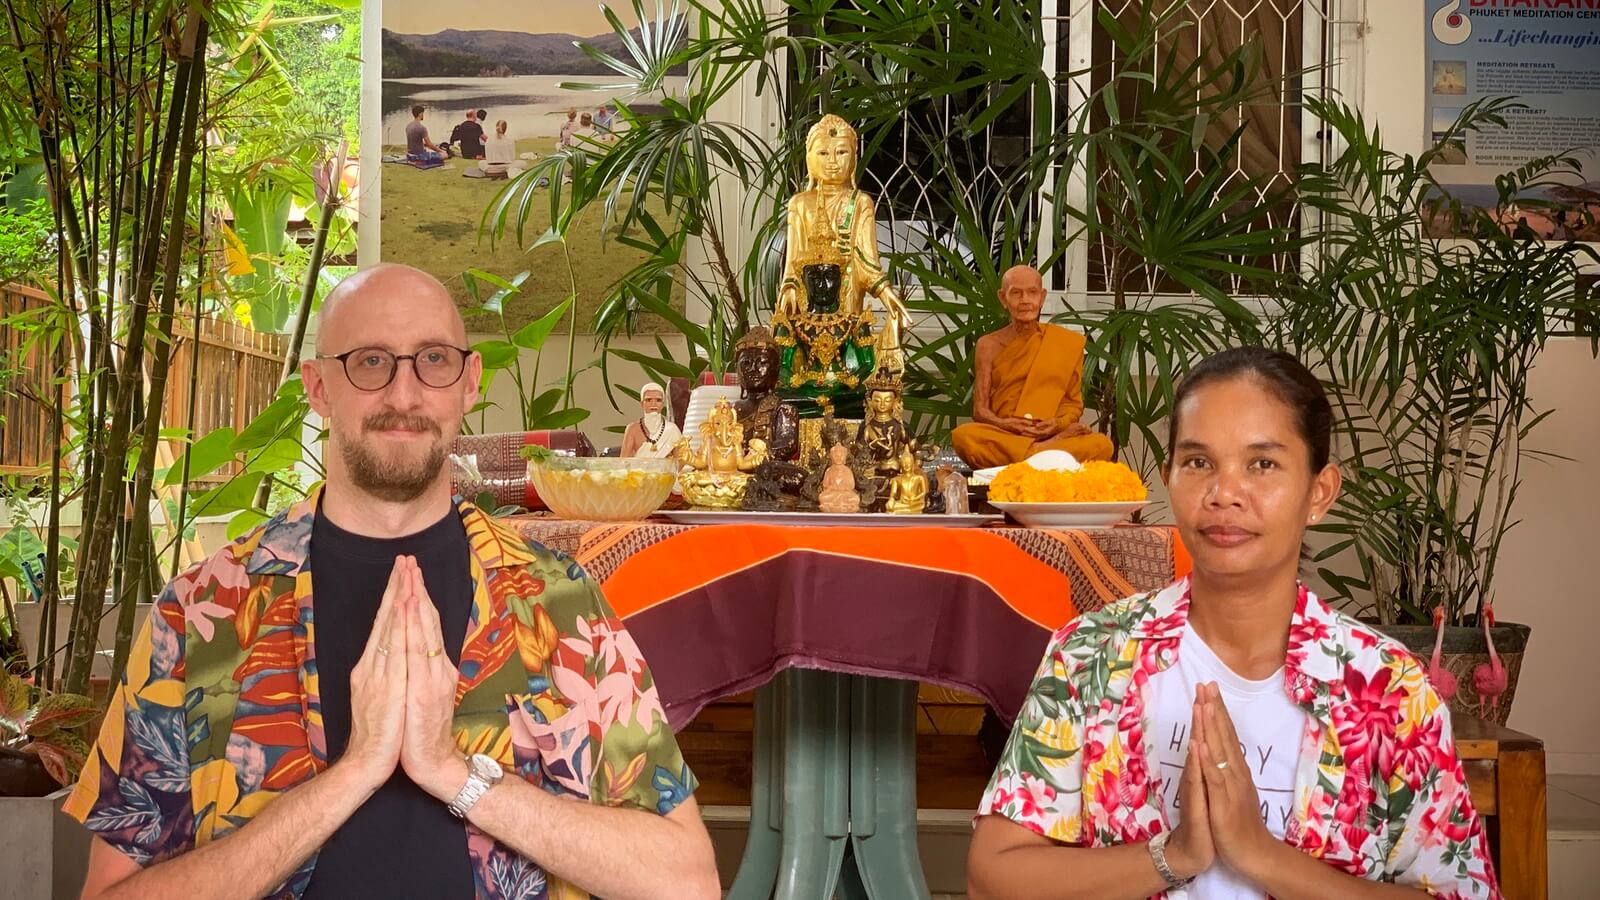 Tobi and Parn at the entrance of the Phuket Meditation Center. Behind them there is a table with Buddha statues.